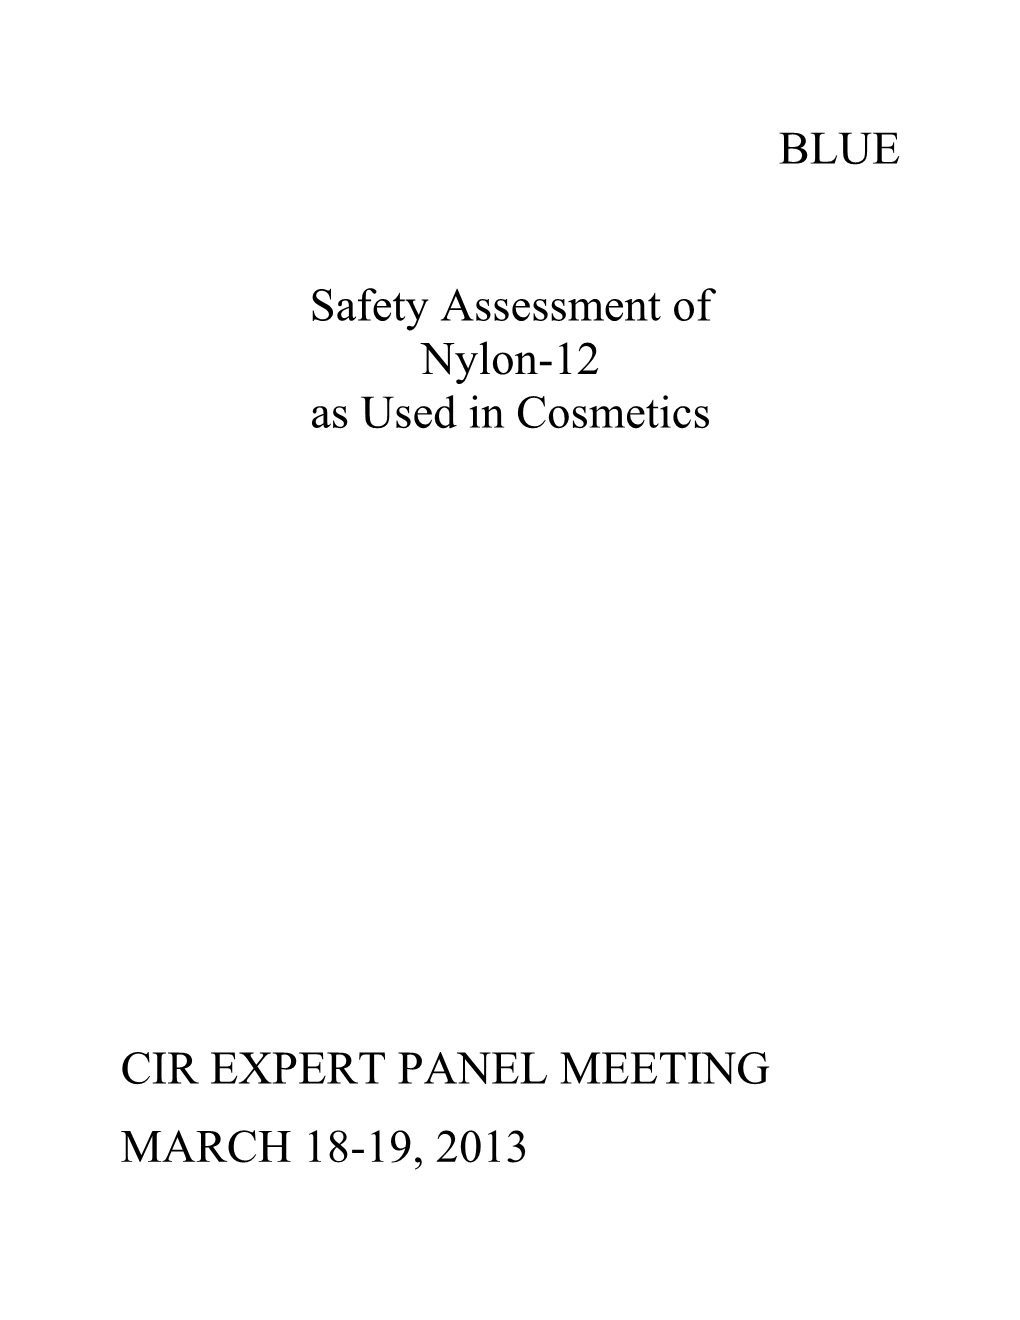 BLUE Safety Assessment of Nylon-12 As Used in Cosmetics CIR EXPERT PANEL MEETING MARCH 18-19, 2013